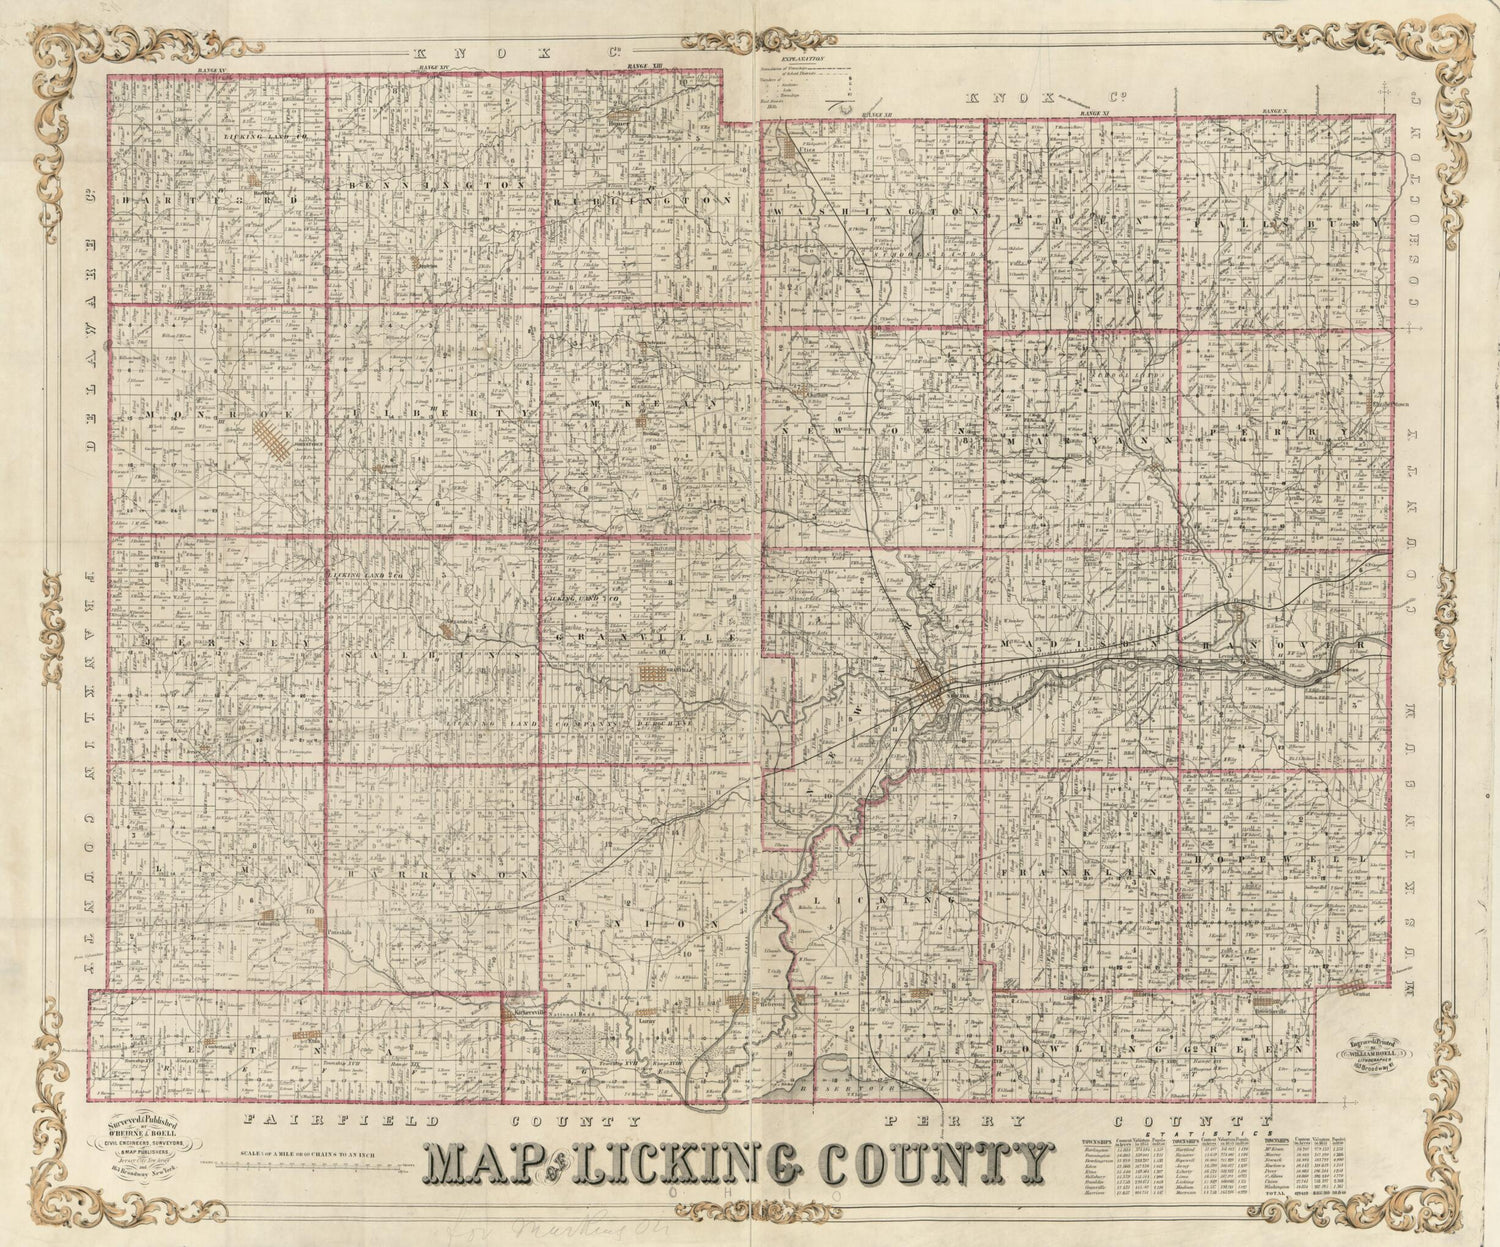 This old map of Map of Licking County, Ohio from 1854 was created by William Boell, P. O&